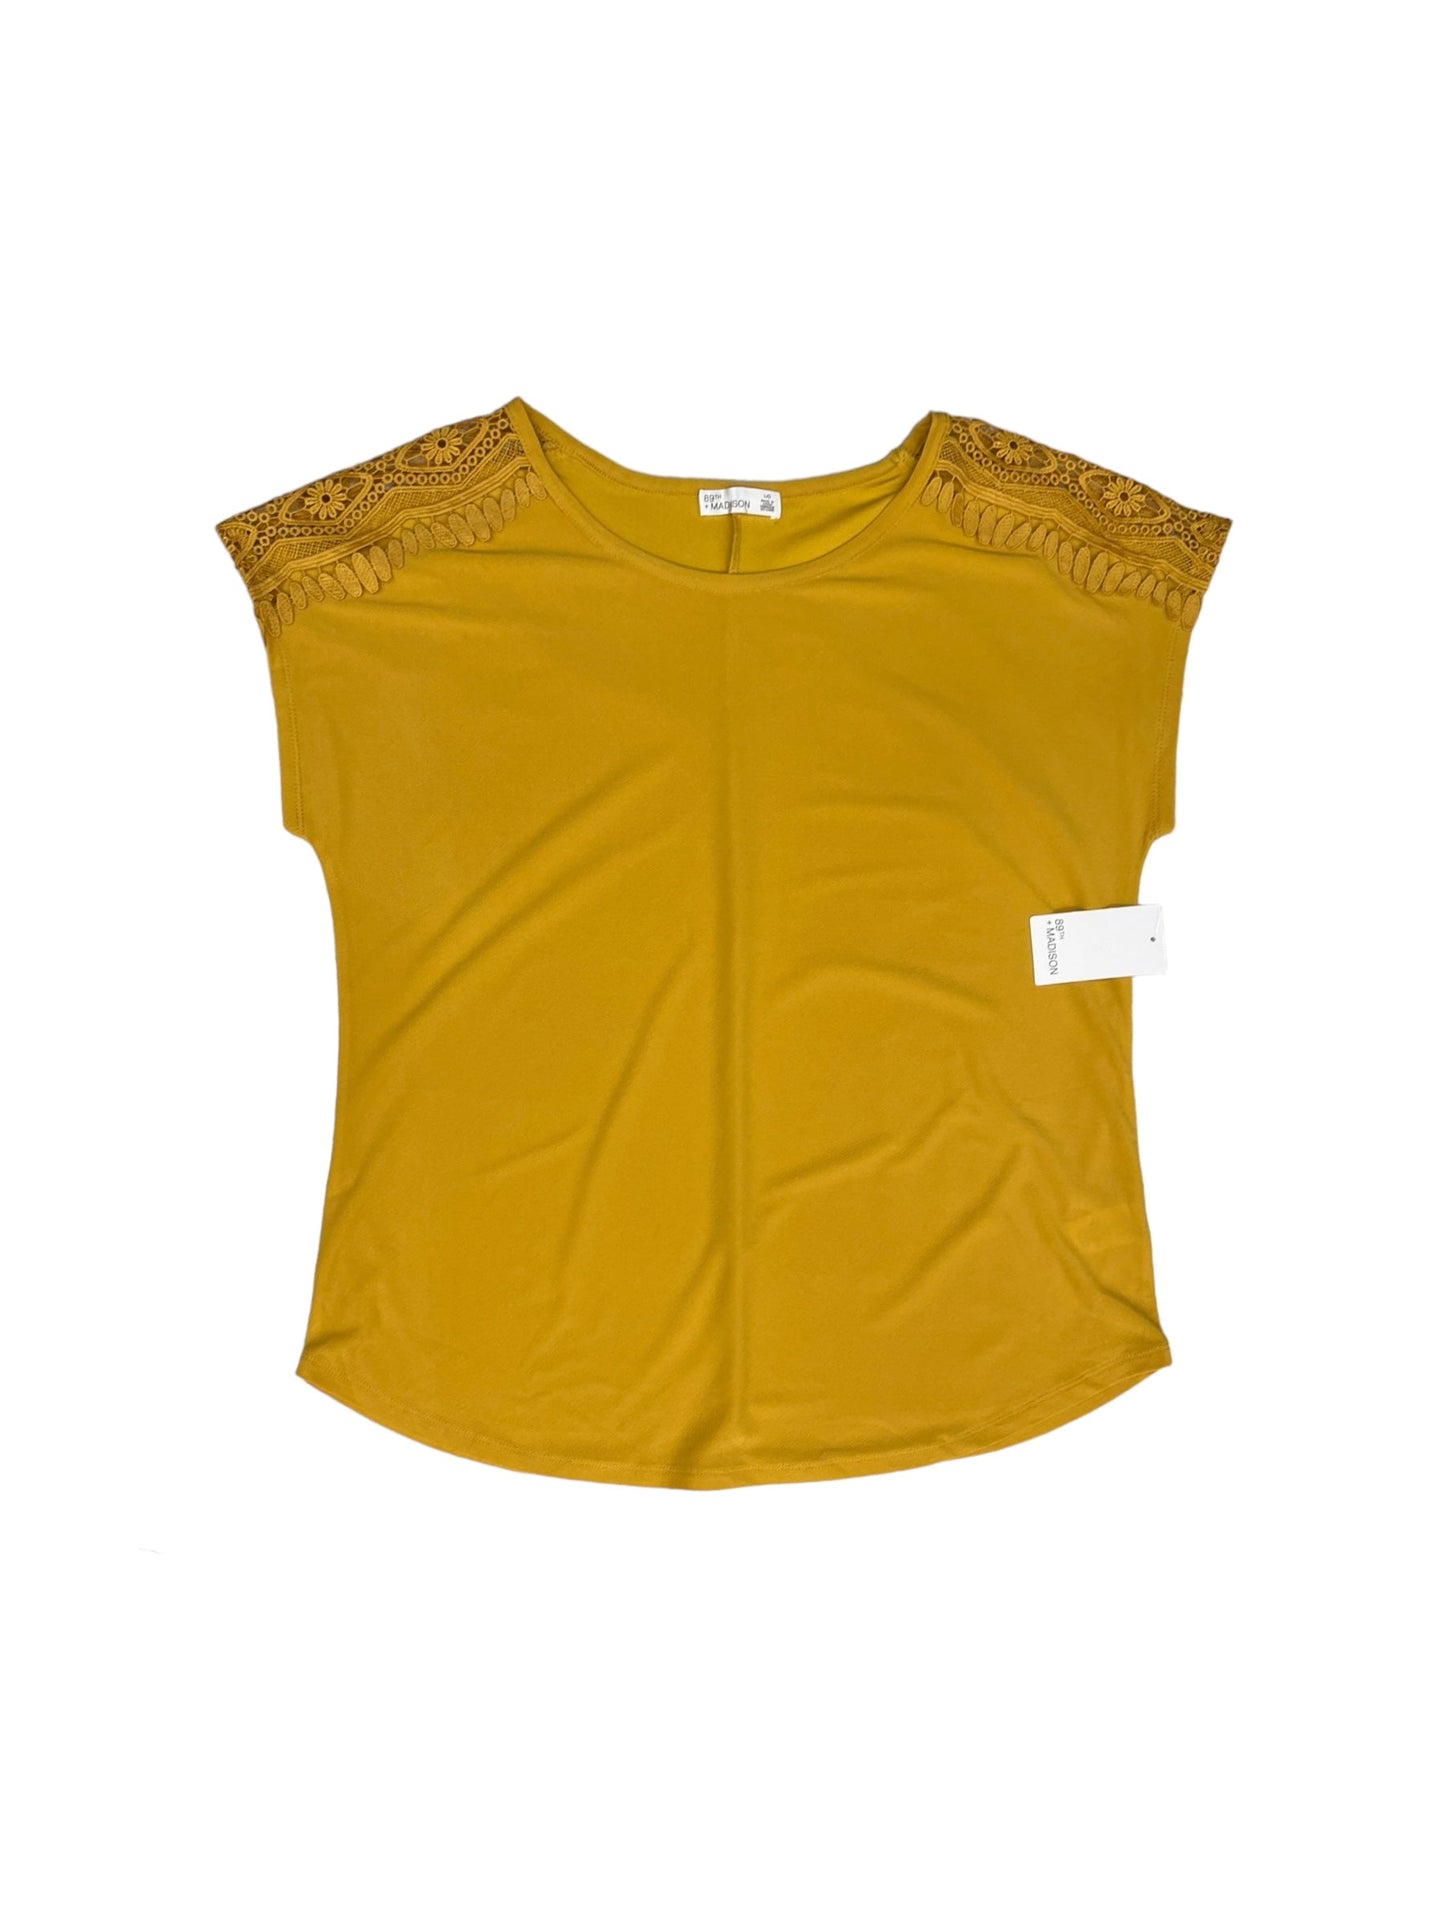 Yellow Top Short Sleeve 89th And Madison, Size L